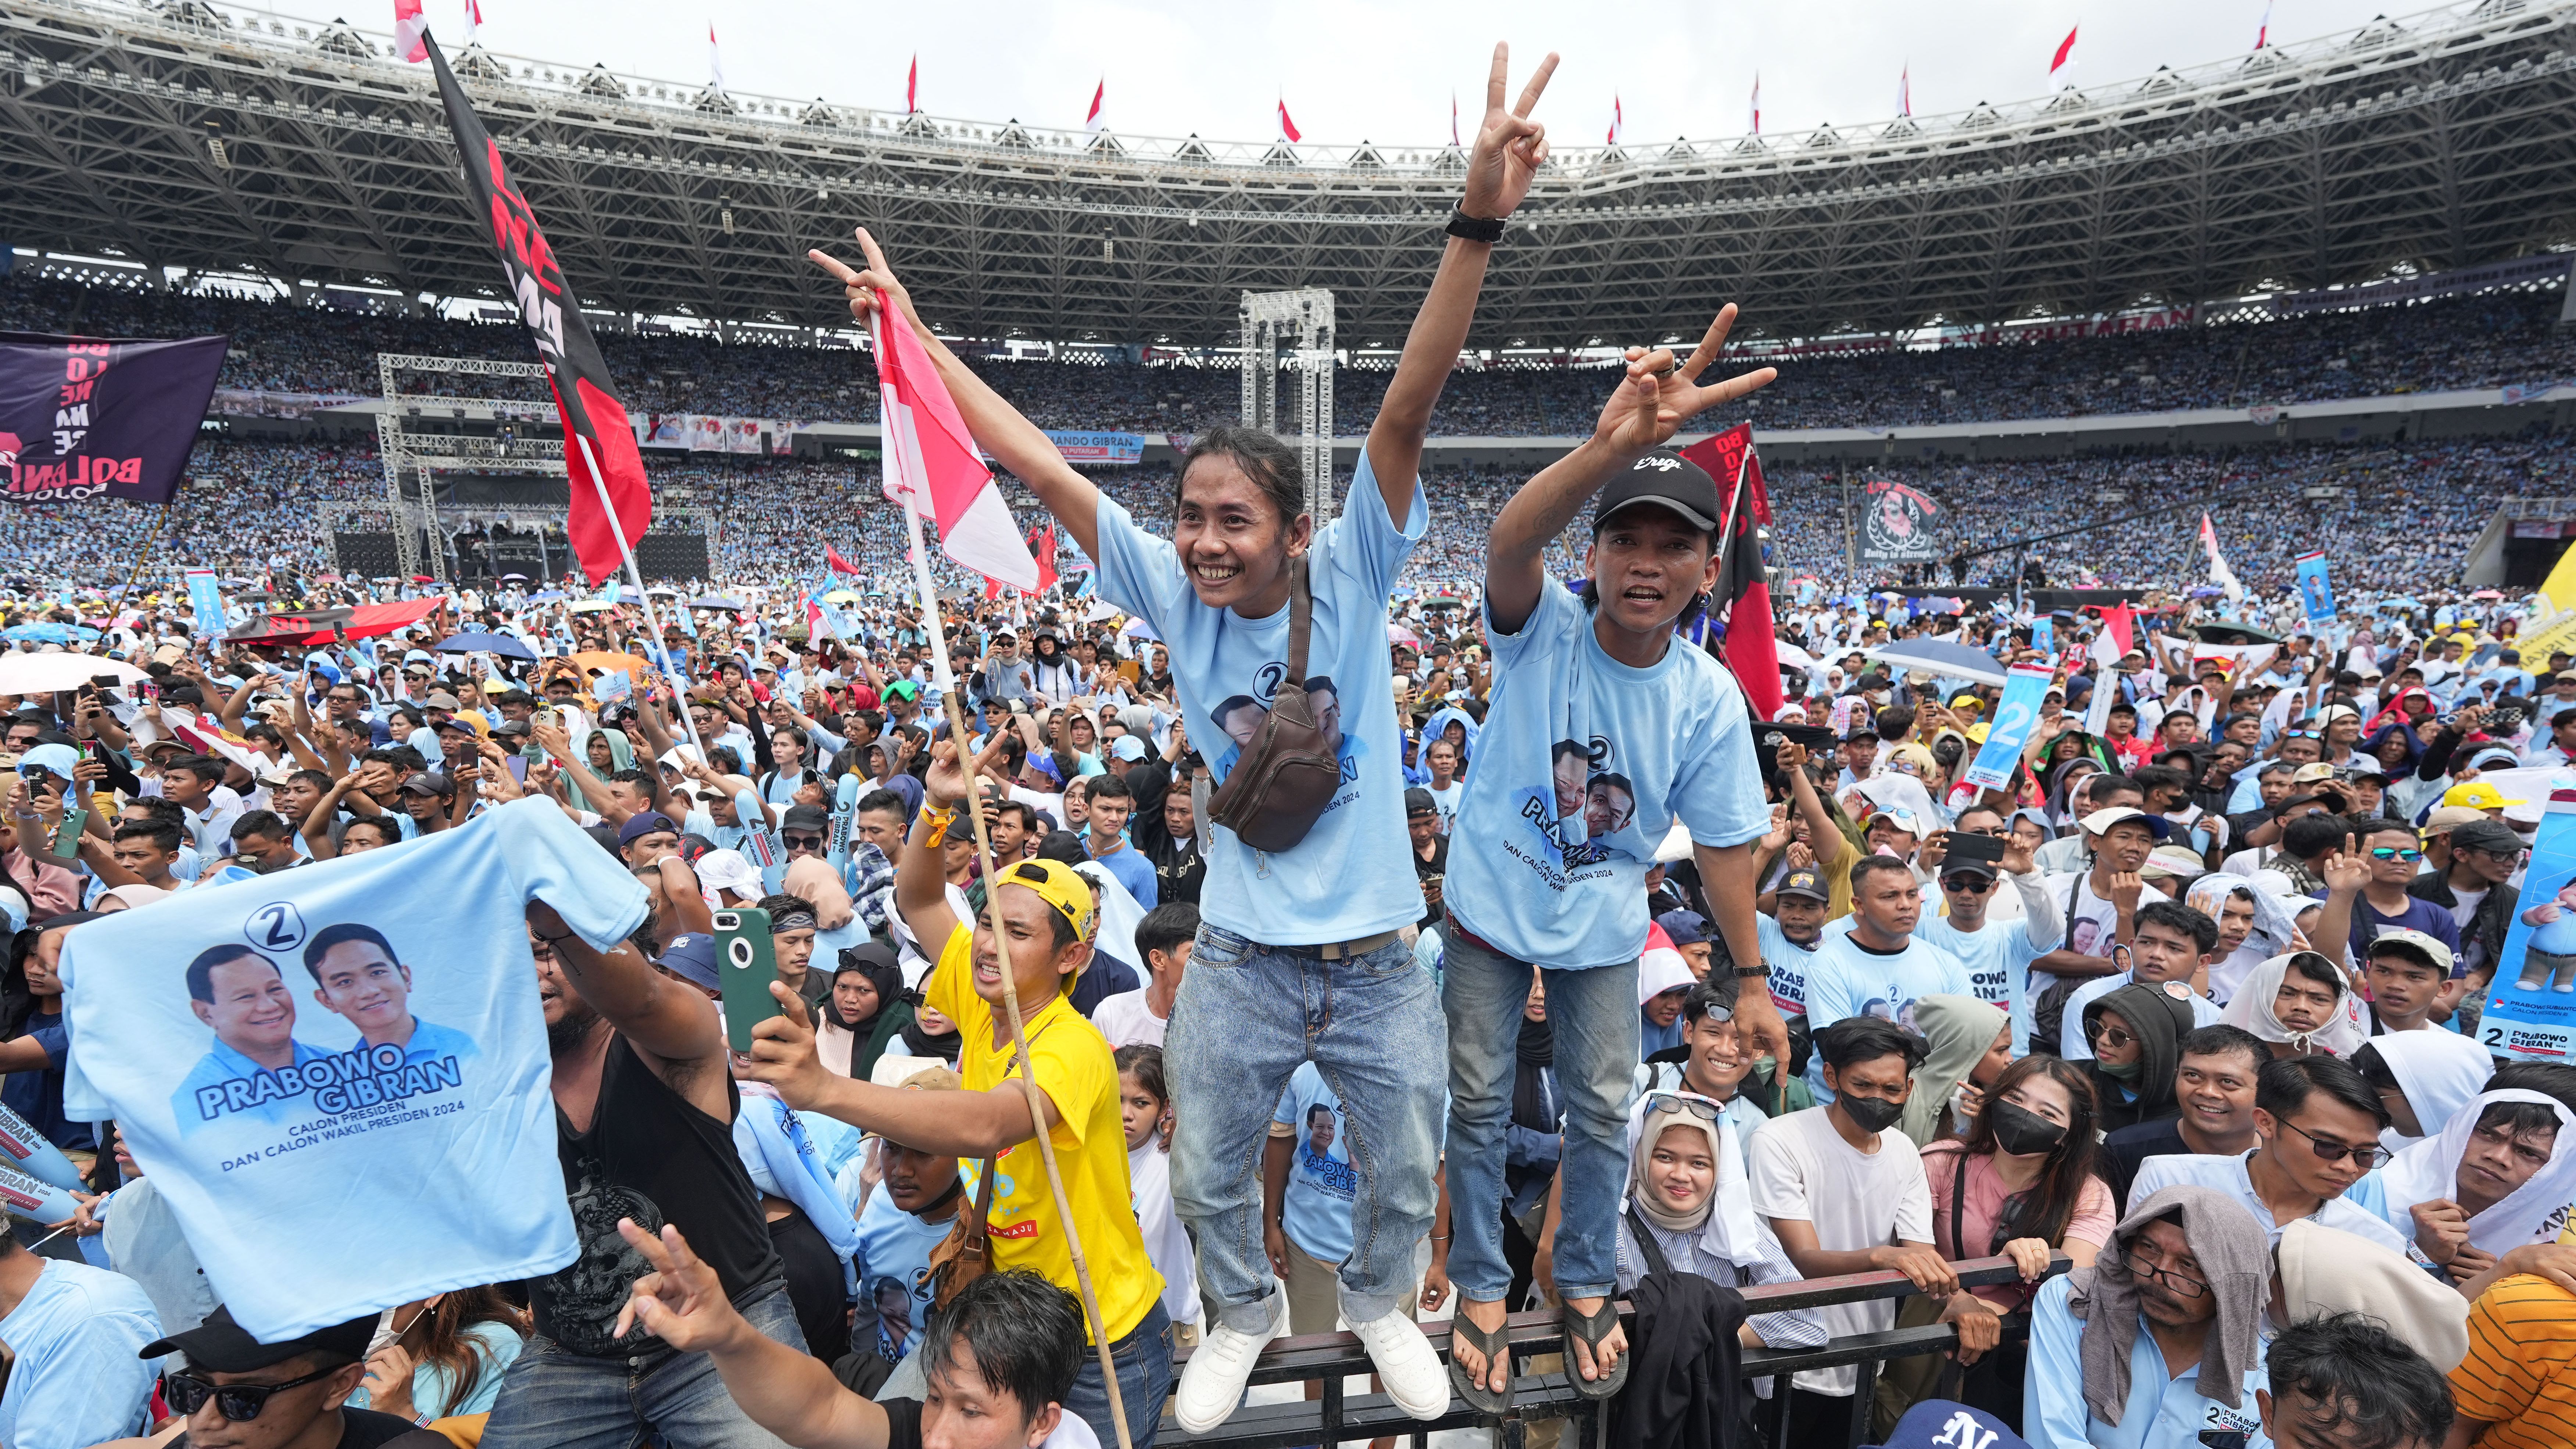 Prabowo supporters at a campaign rally in Jakarta on February 10.